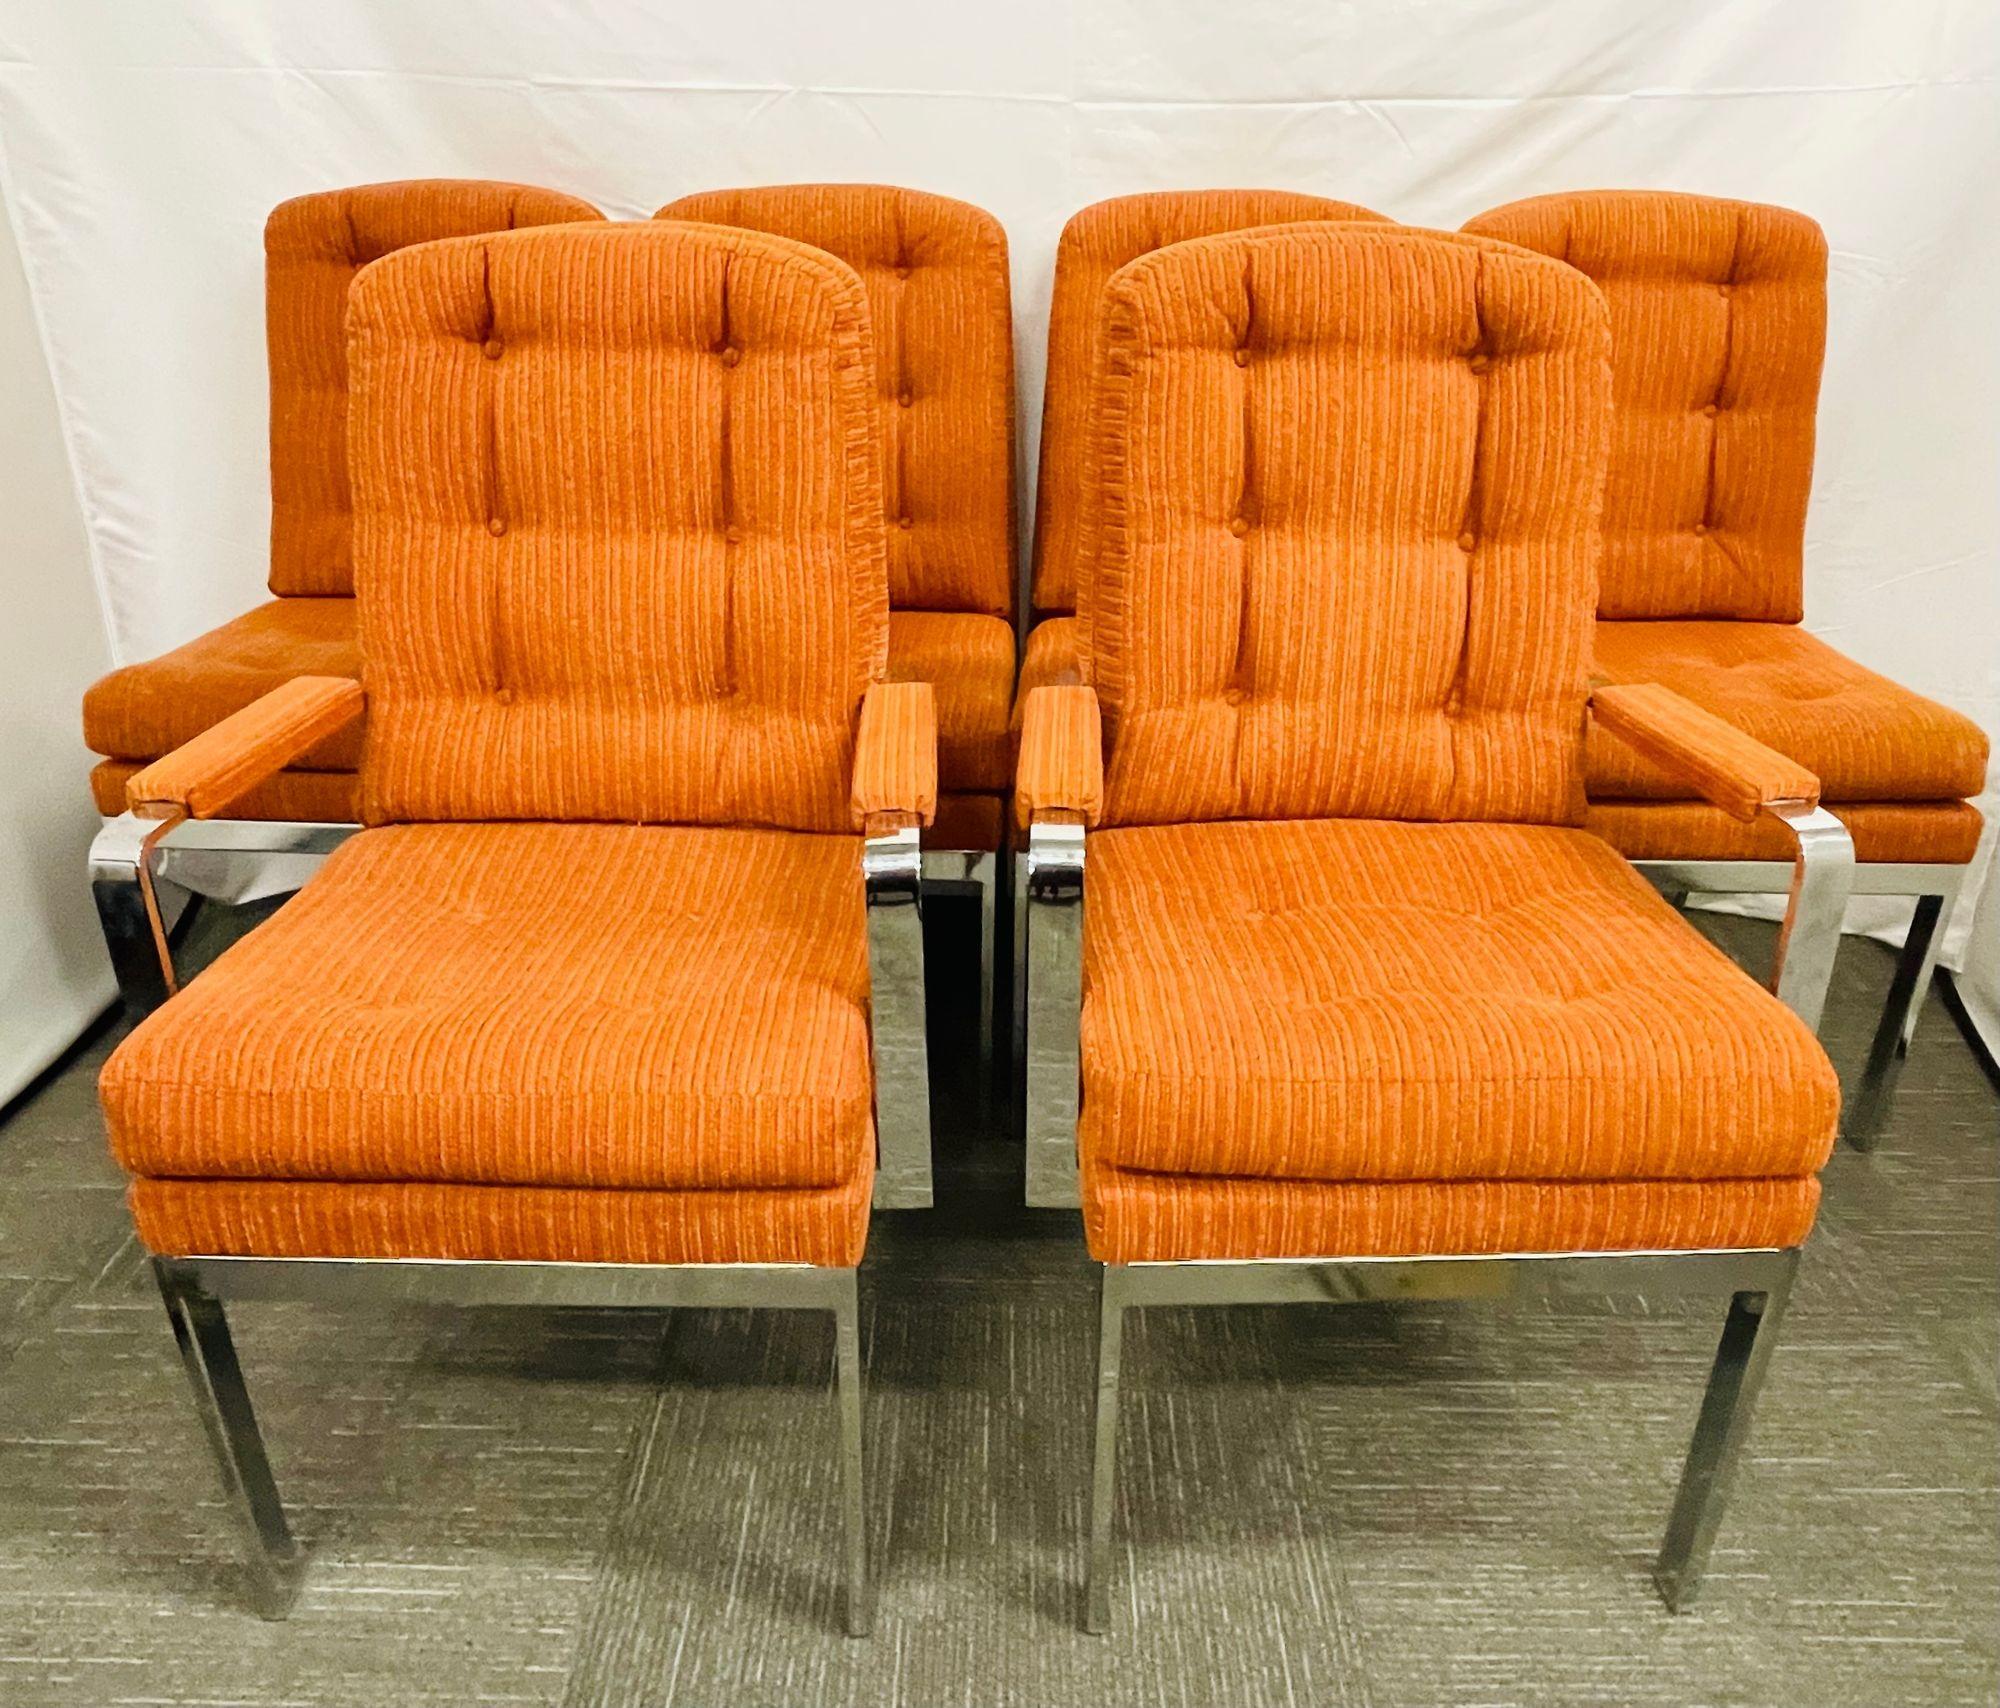 Set of Six Mid-Century Modern Dining Chairs, Milo Baughman Style, Chrome, Fabric In Good Condition For Sale In Stamford, CT